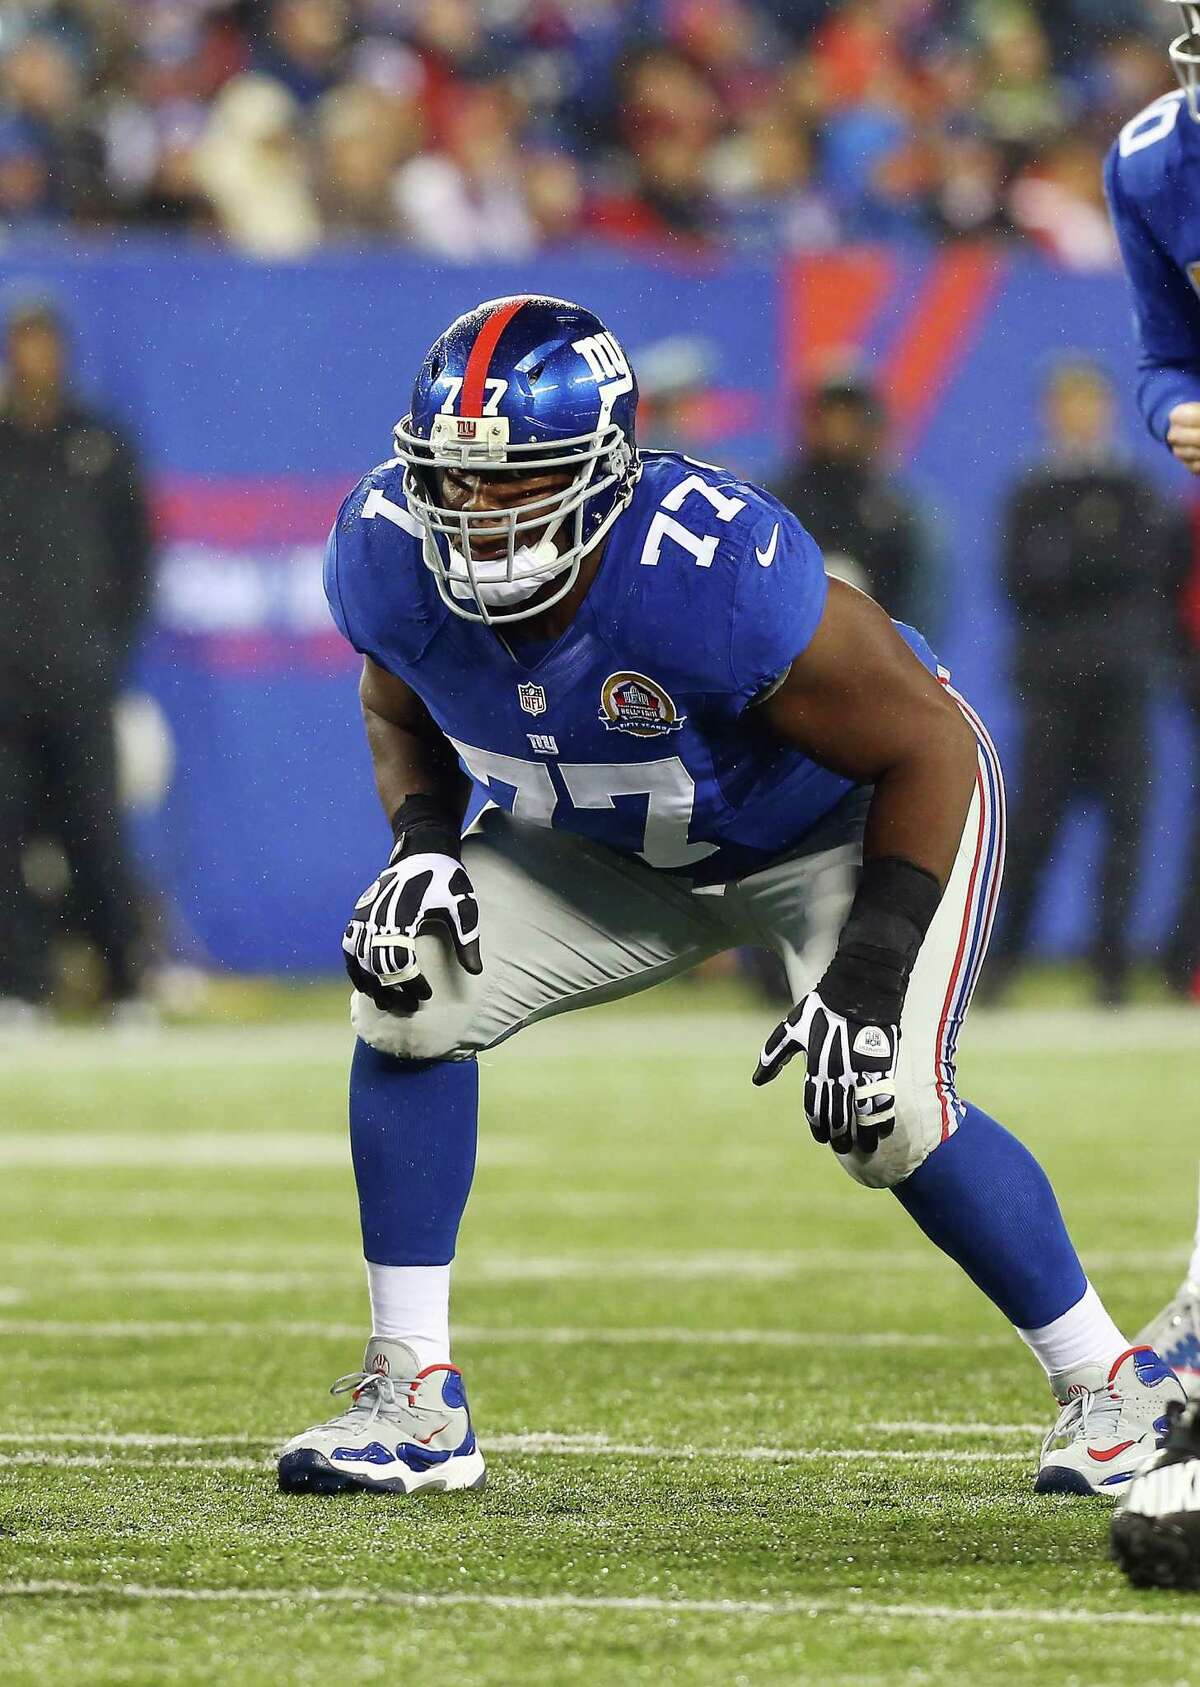 EAST RUTHERFORD, NJ - DECEMBER 09: (NEW YORK DAILIES OUT) Kevin Boothe #77 of the New York Giants in action against the New Orleans Saints at MetLife Stadium on December 9, 2012 in East Rutherford, New Jersey. The Giants defeated the Saints 52-27. (Photo by Jim McIsaac/Getty Images)